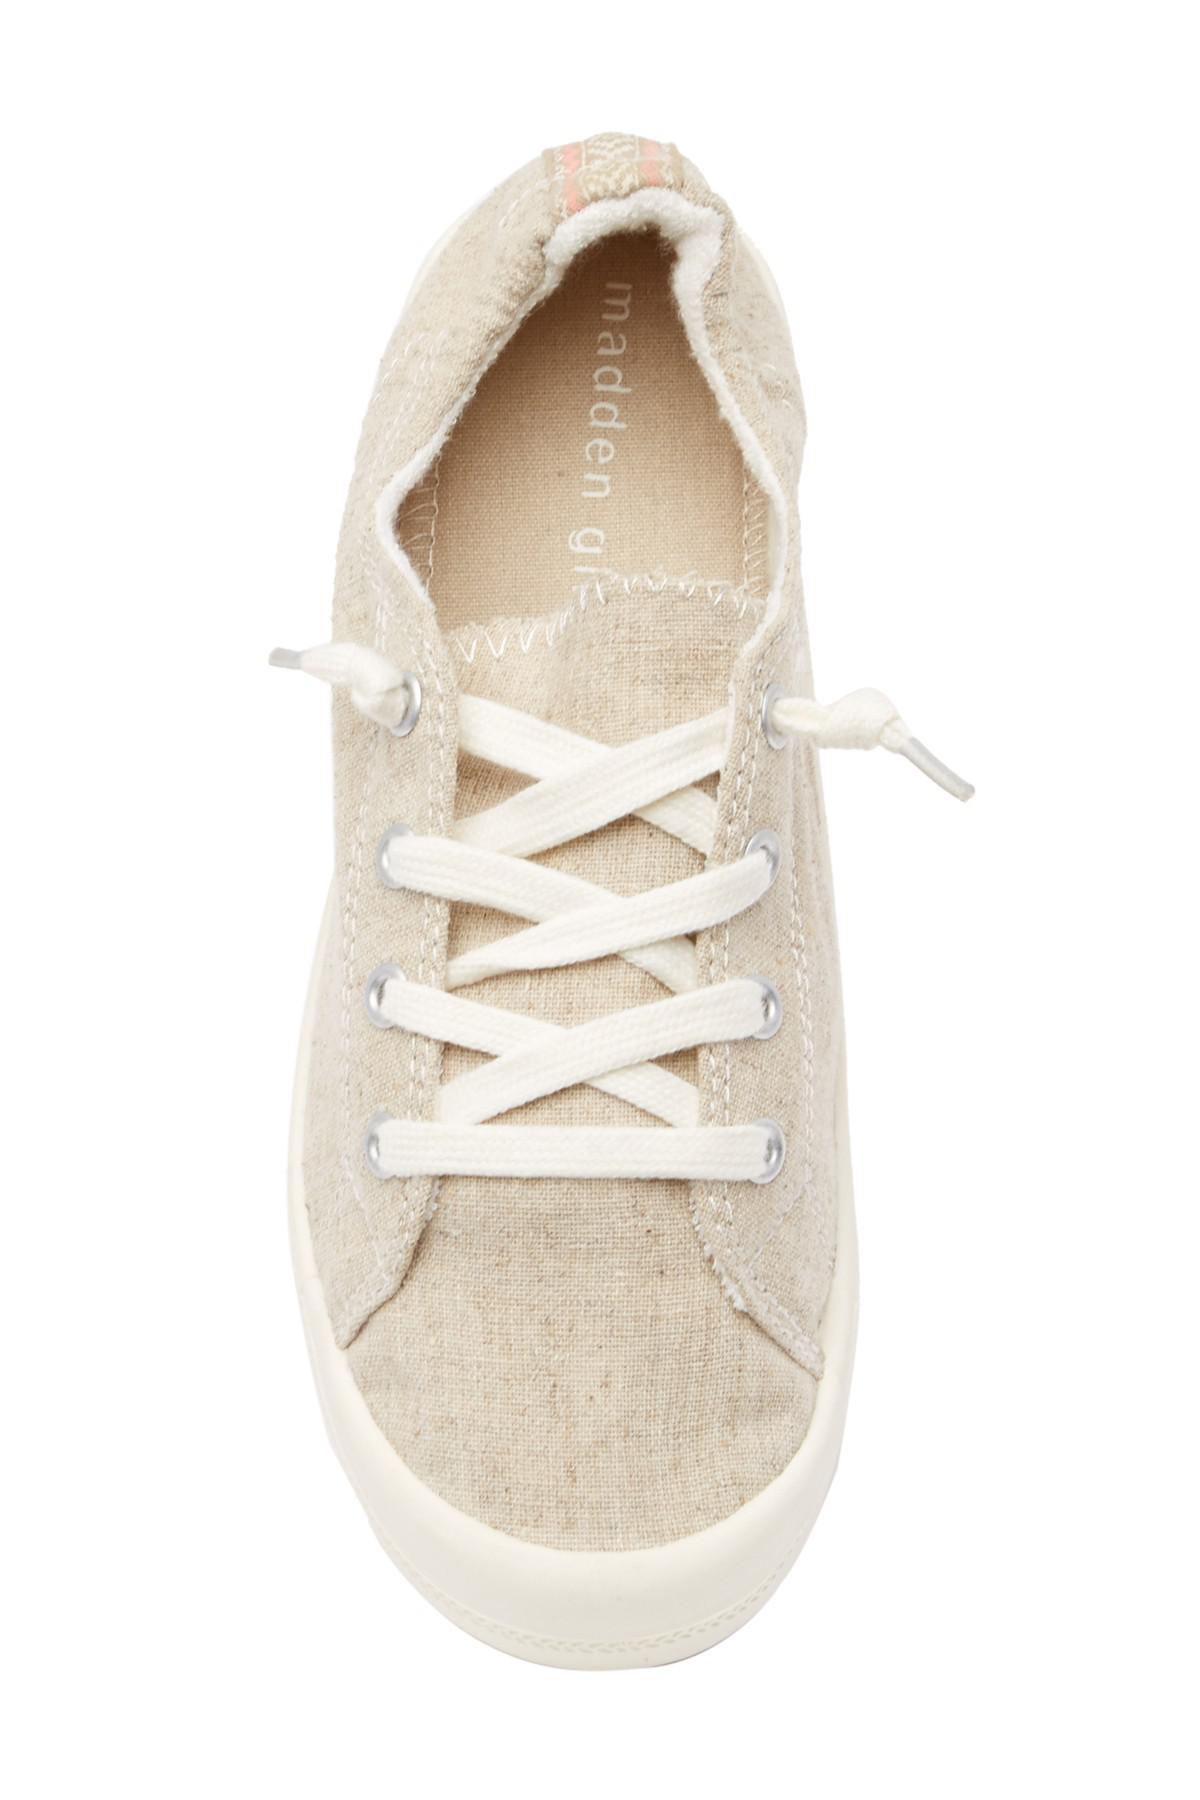 Madden Girl Barby Lace-up Sneaker - Lyst